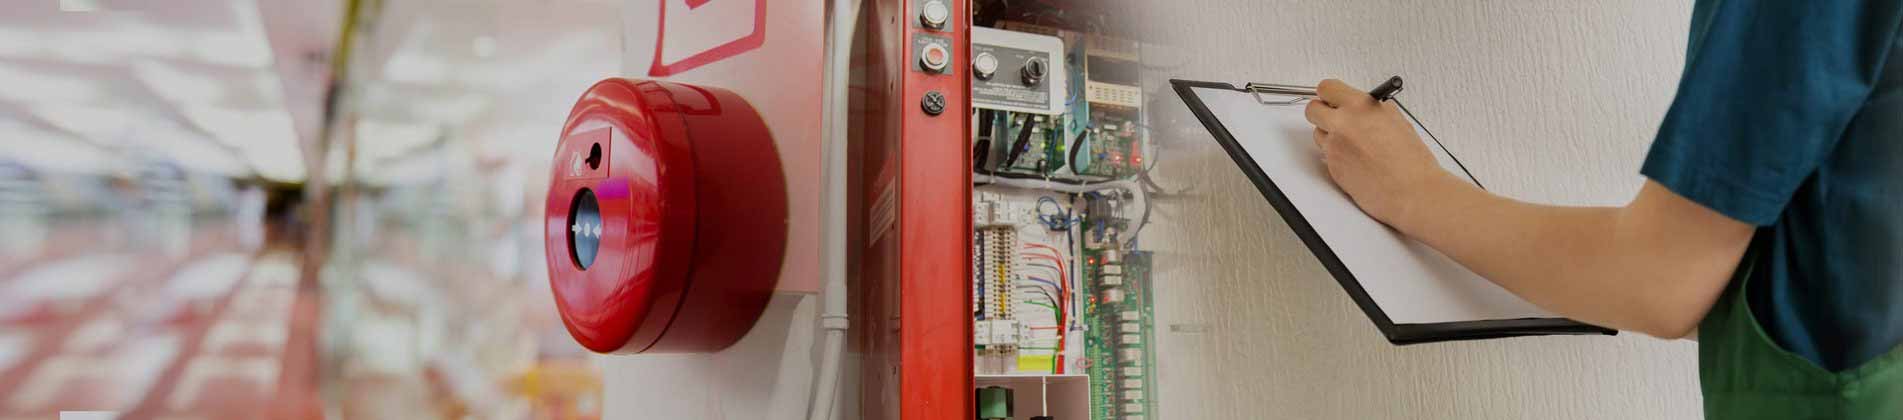 Fire Alarm System Inspection in Houston TX